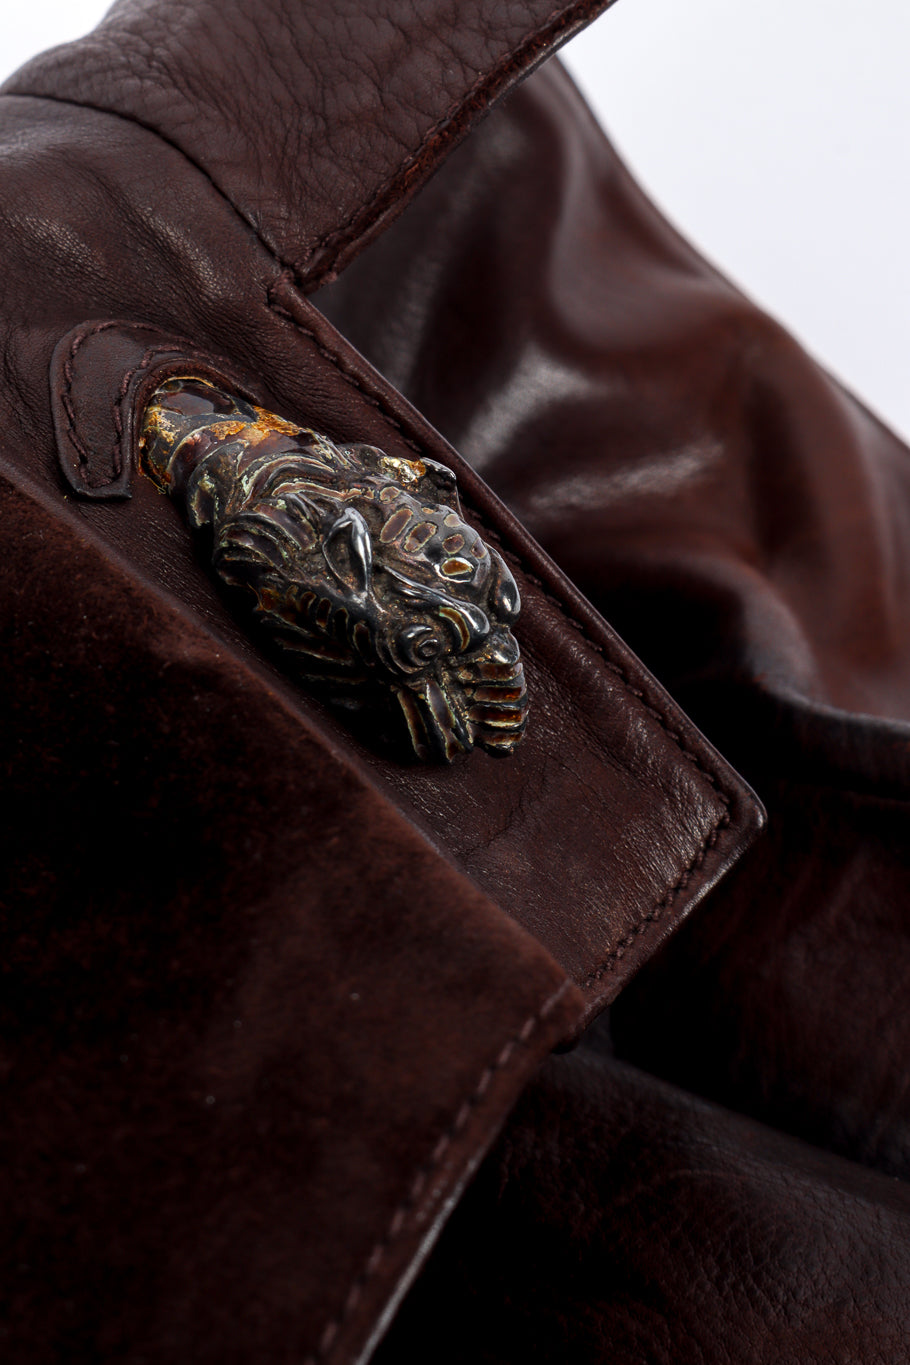 Vintage Gucci Suede and Leather Coat tiger button at collar @recessla